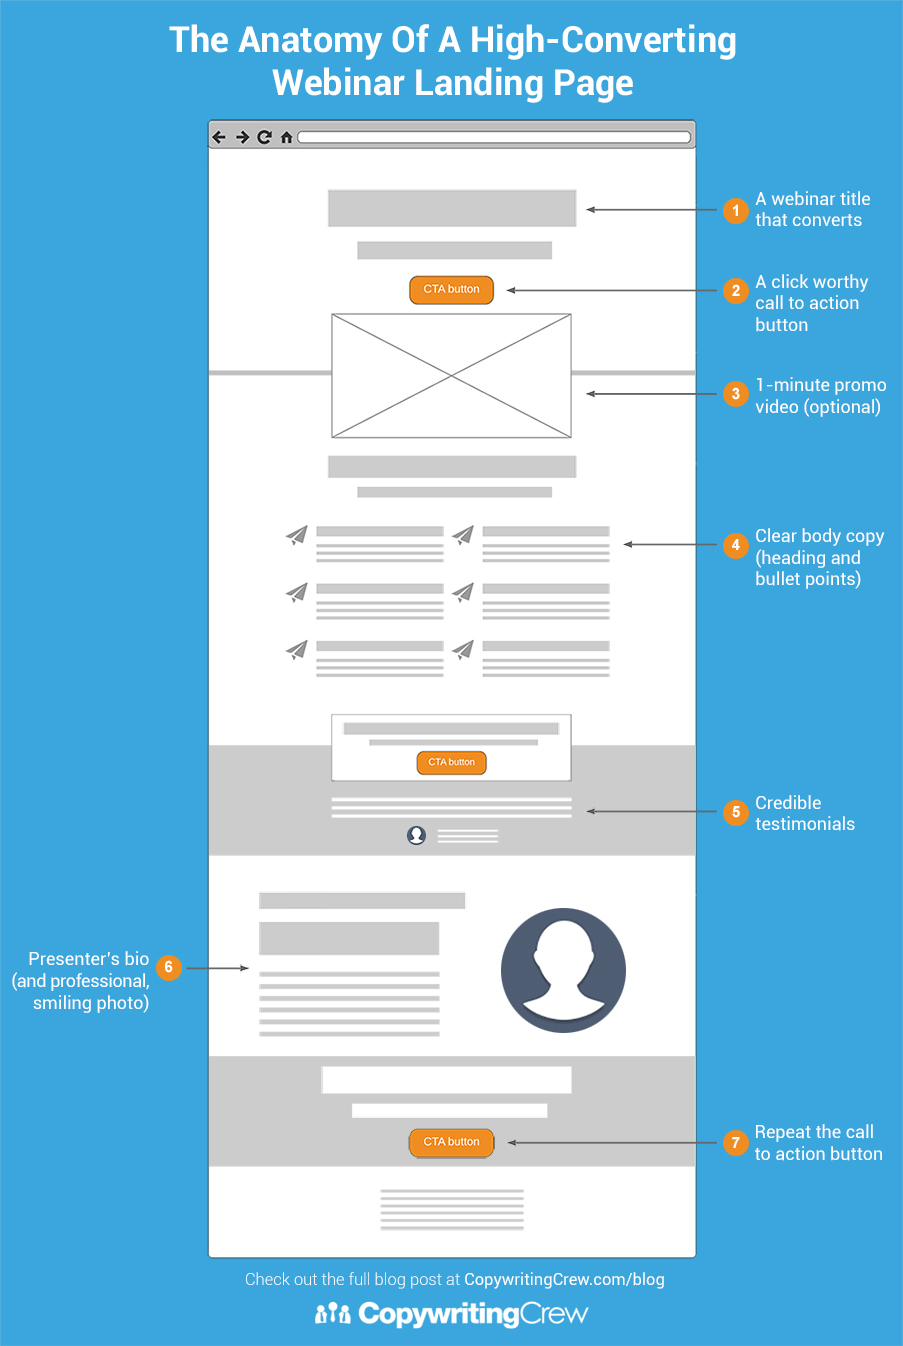 The Anatomy of a A High-Converting Webinar Landing Page